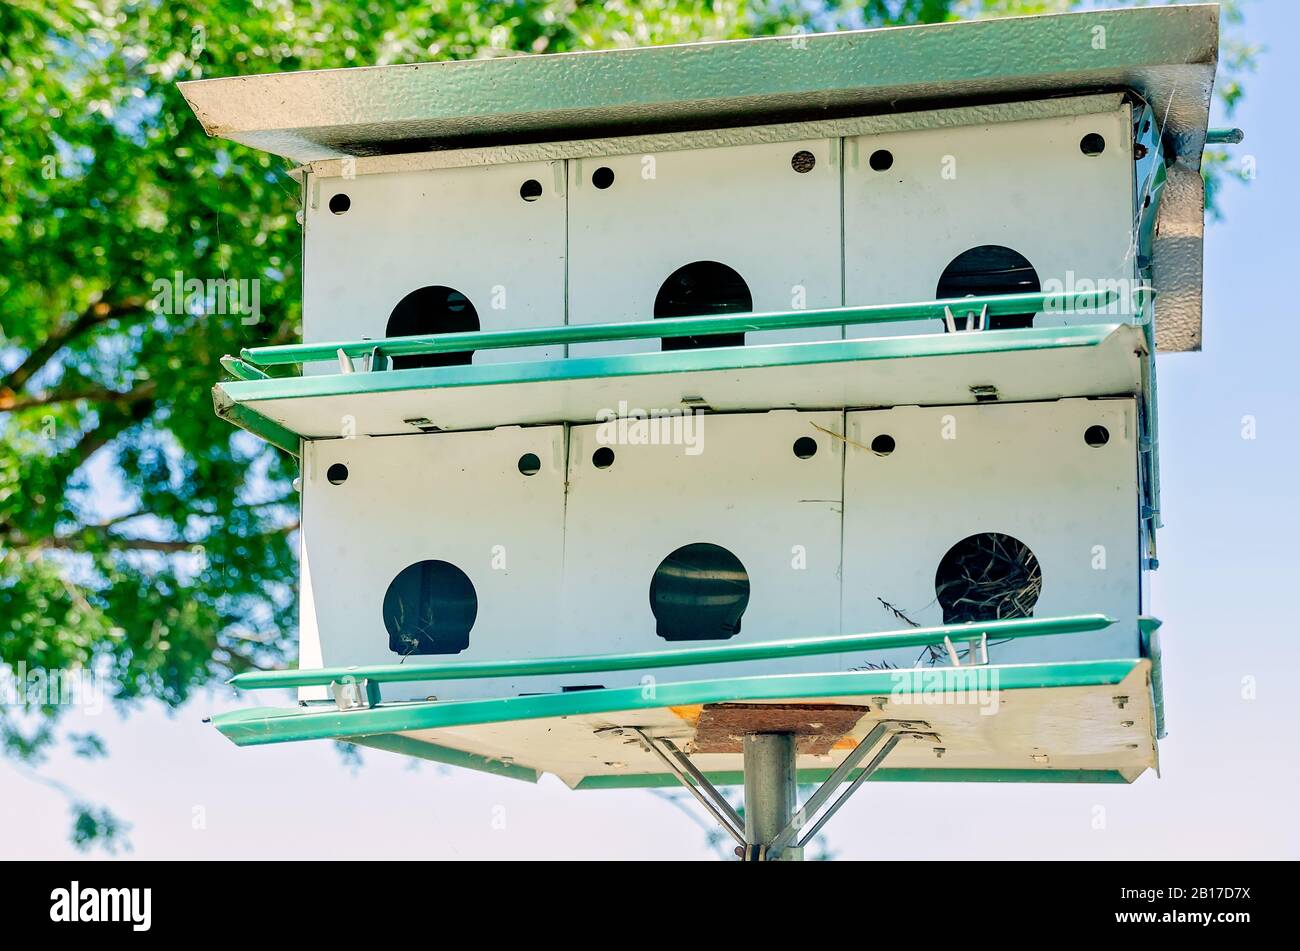 Purple martin birdhouse apartments are pictured with protruding nesting materials, July 26, 2019, in Vicksburg, Mississippi. Stock Photo